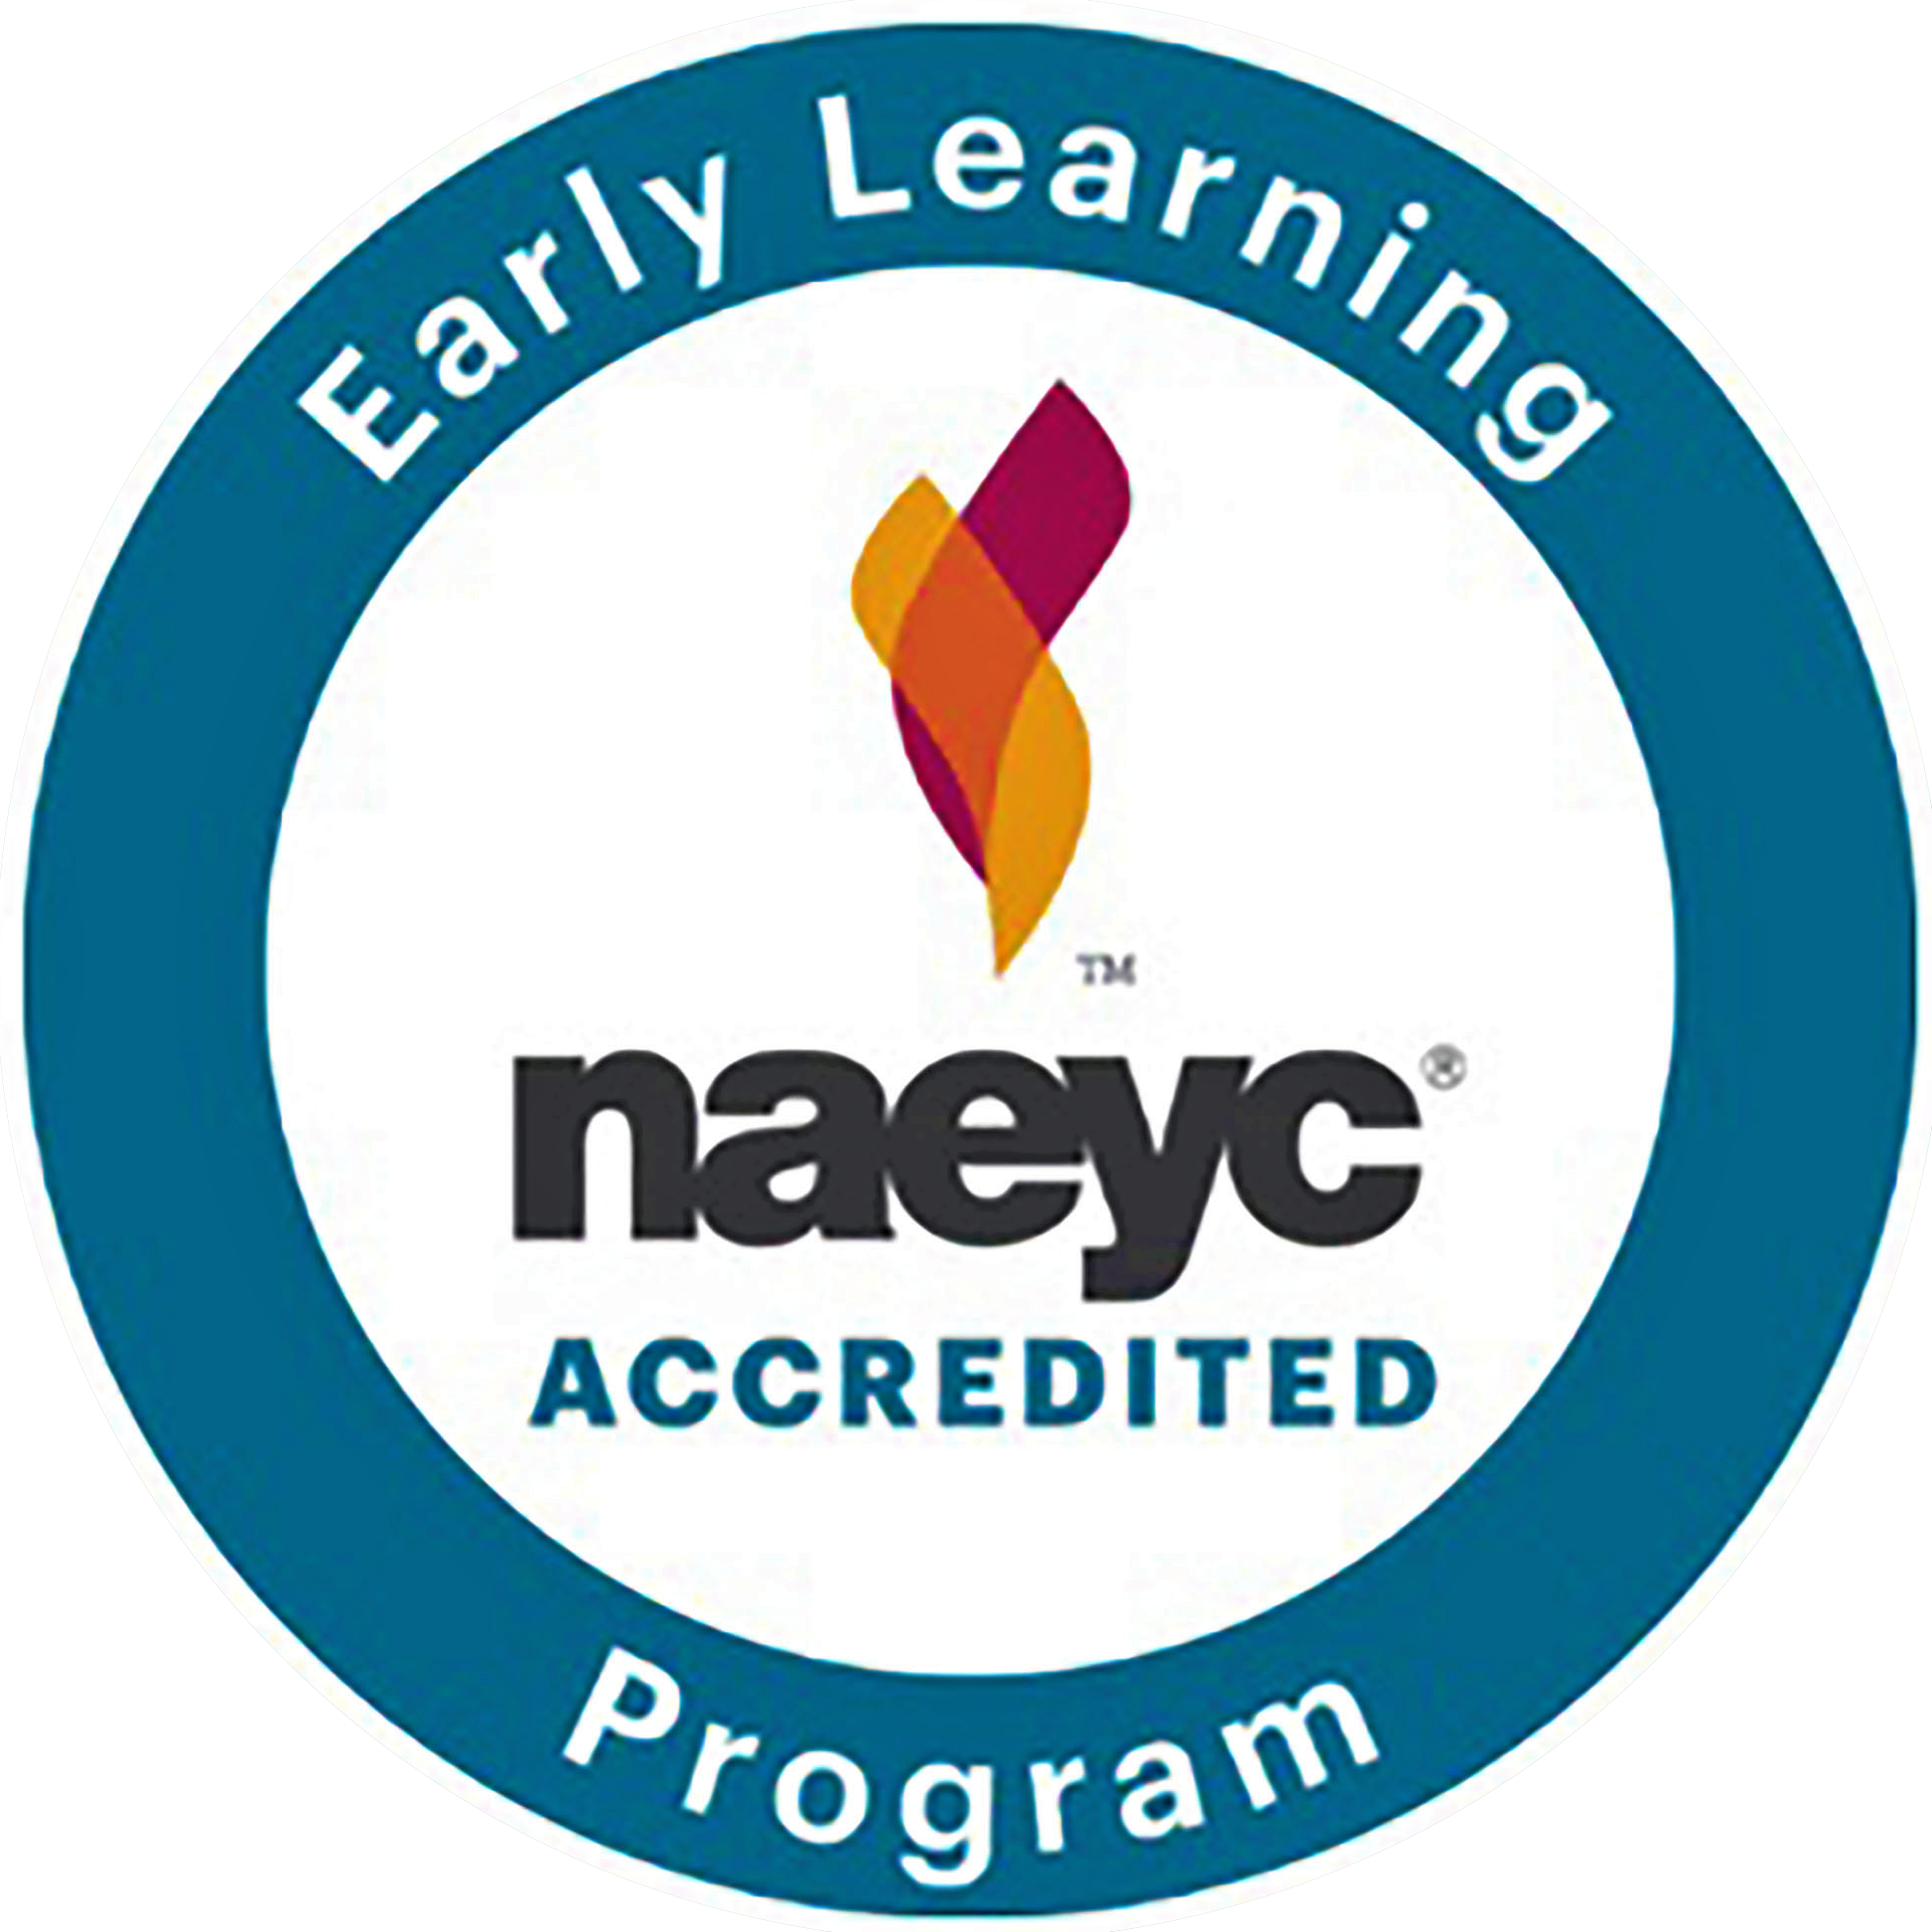 https://www.naeyc.org/accreditation/early-learning-program-accreditation